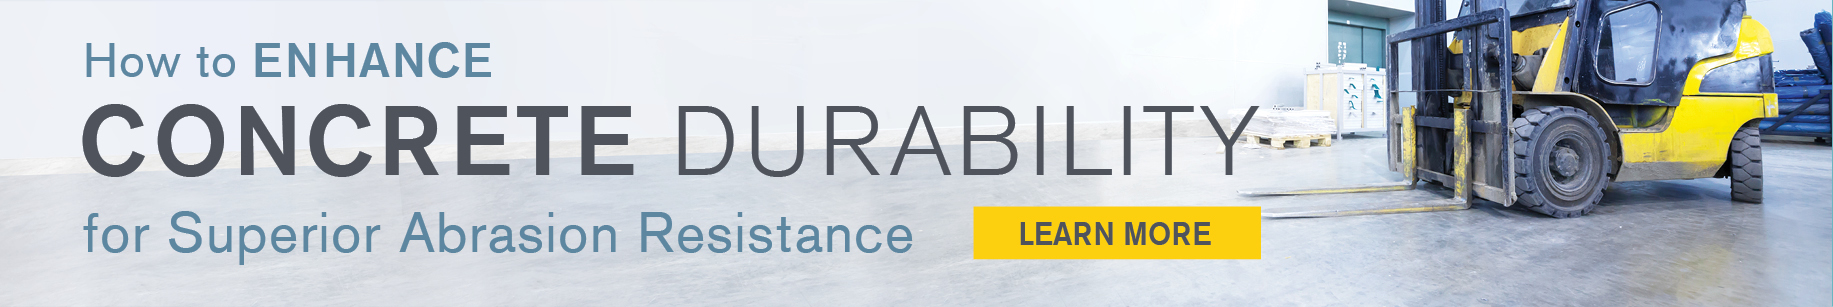 Learn how to enhance concrete durability for superior abrasion resistance.